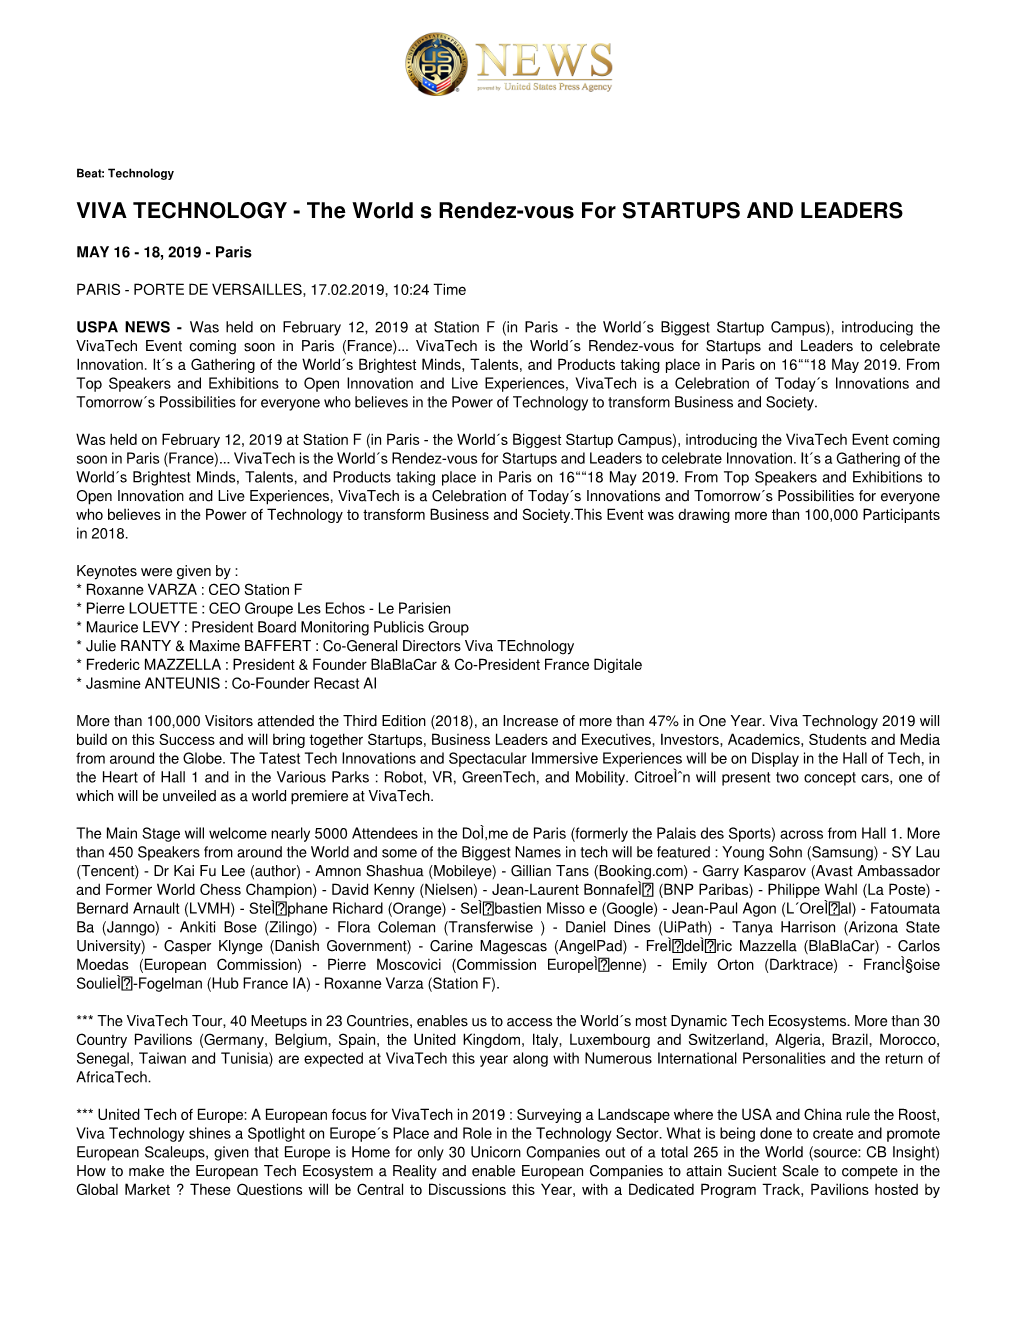 VIVA TECHNOLOGY - the World S Rendez-Vous for STARTUPS and LEADERS